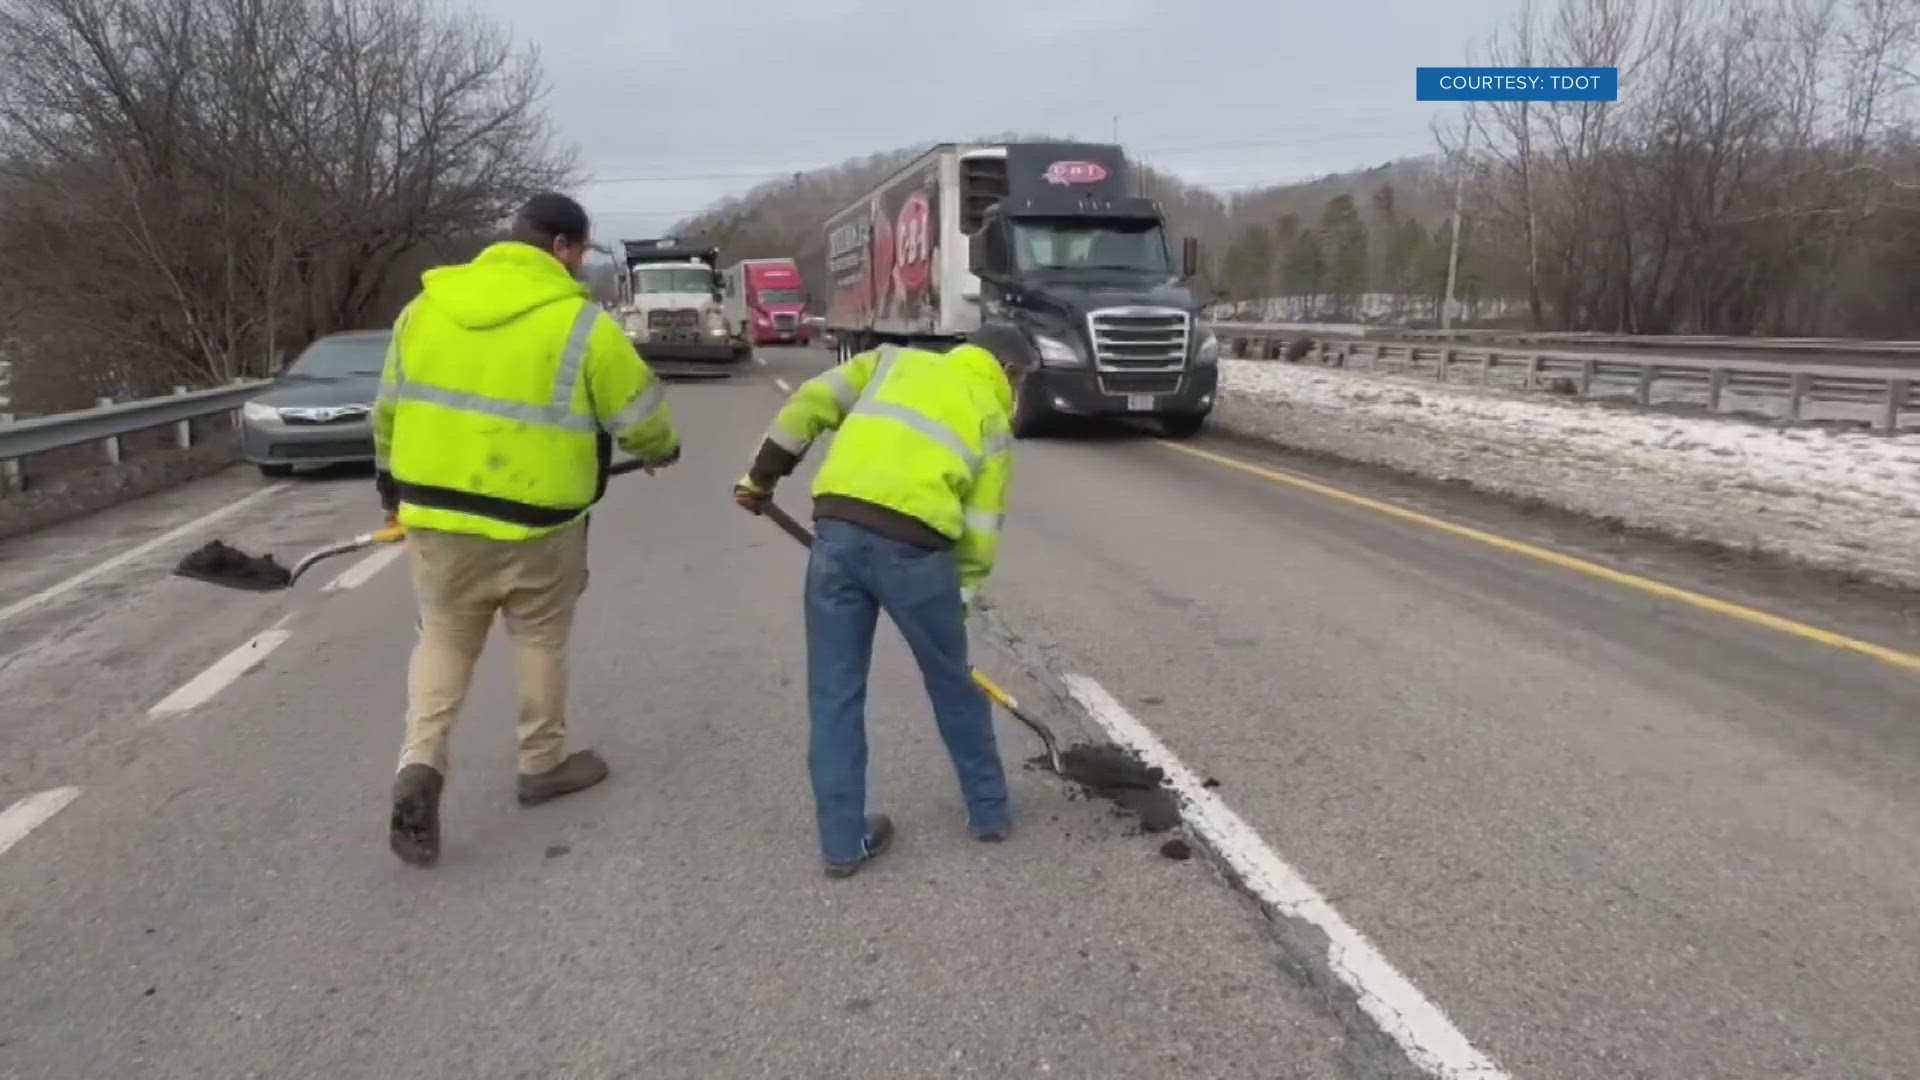 The Tennessee Department of Transportation is asking people to drive with caution as its crews are patching potholes.